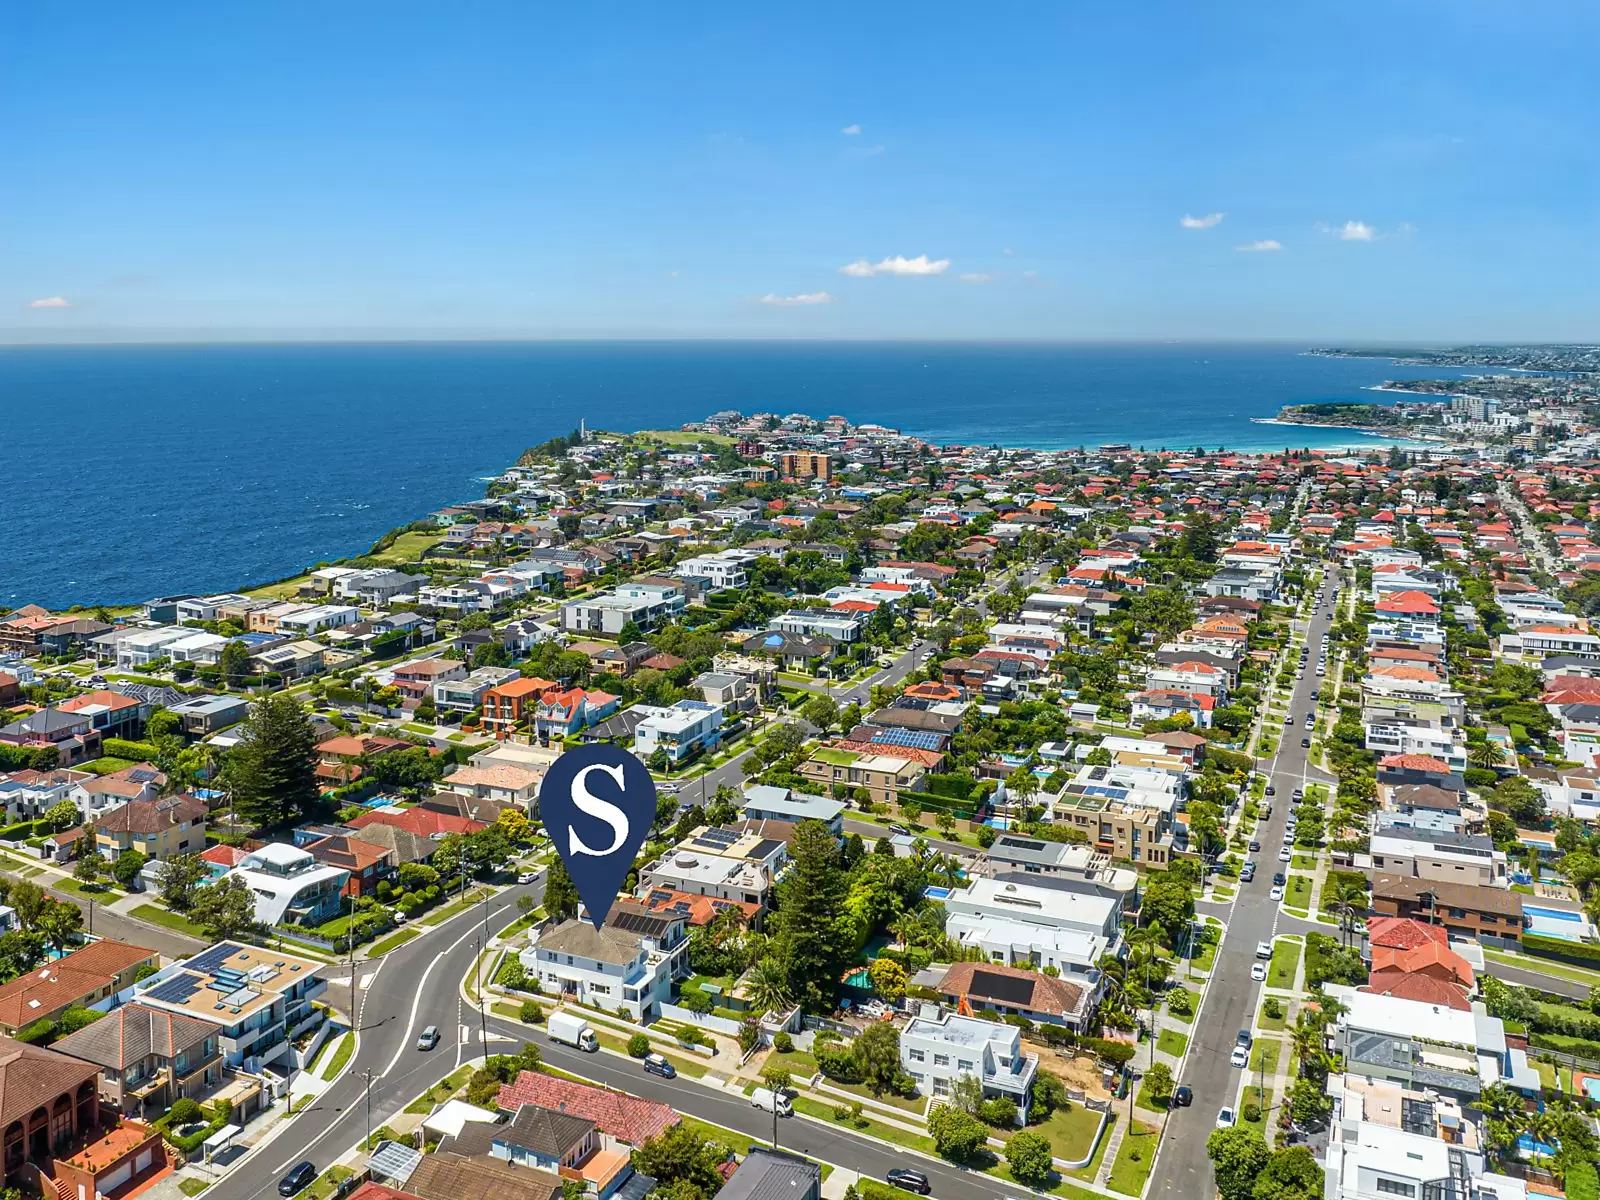 Photo #24: 190 Military Road, Dover Heights - Auction by Sydney Sotheby's International Realty